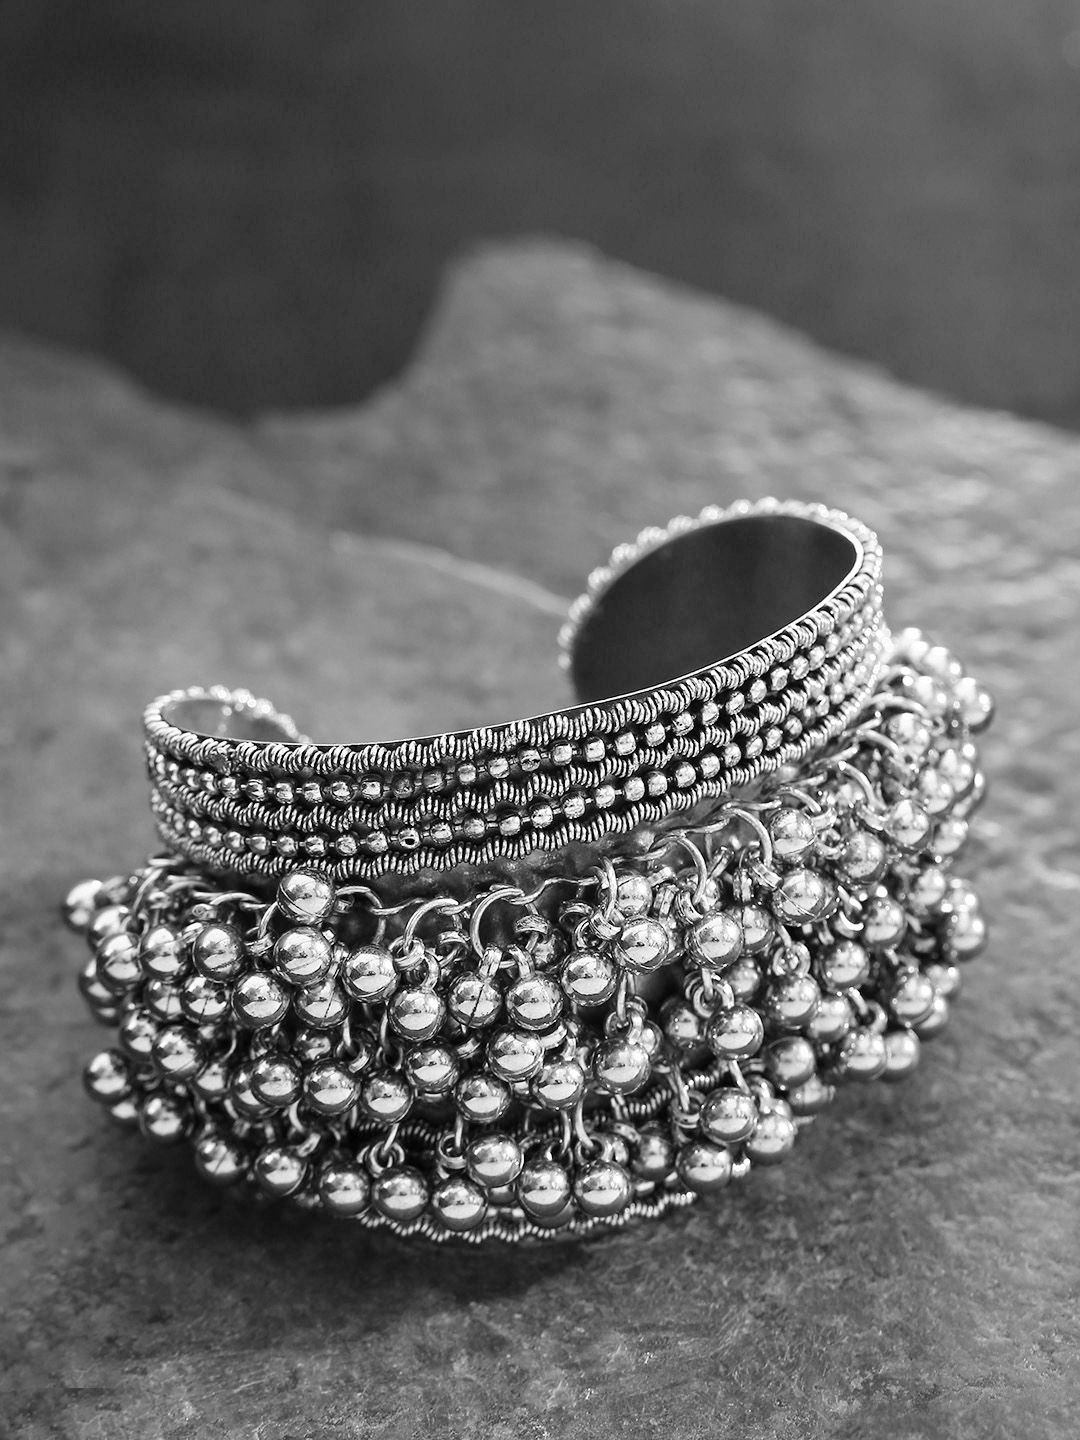 Priyaasi Oxidised Silver-Plated Ghungroo Handcrafted Cuff Bracelet Price in India